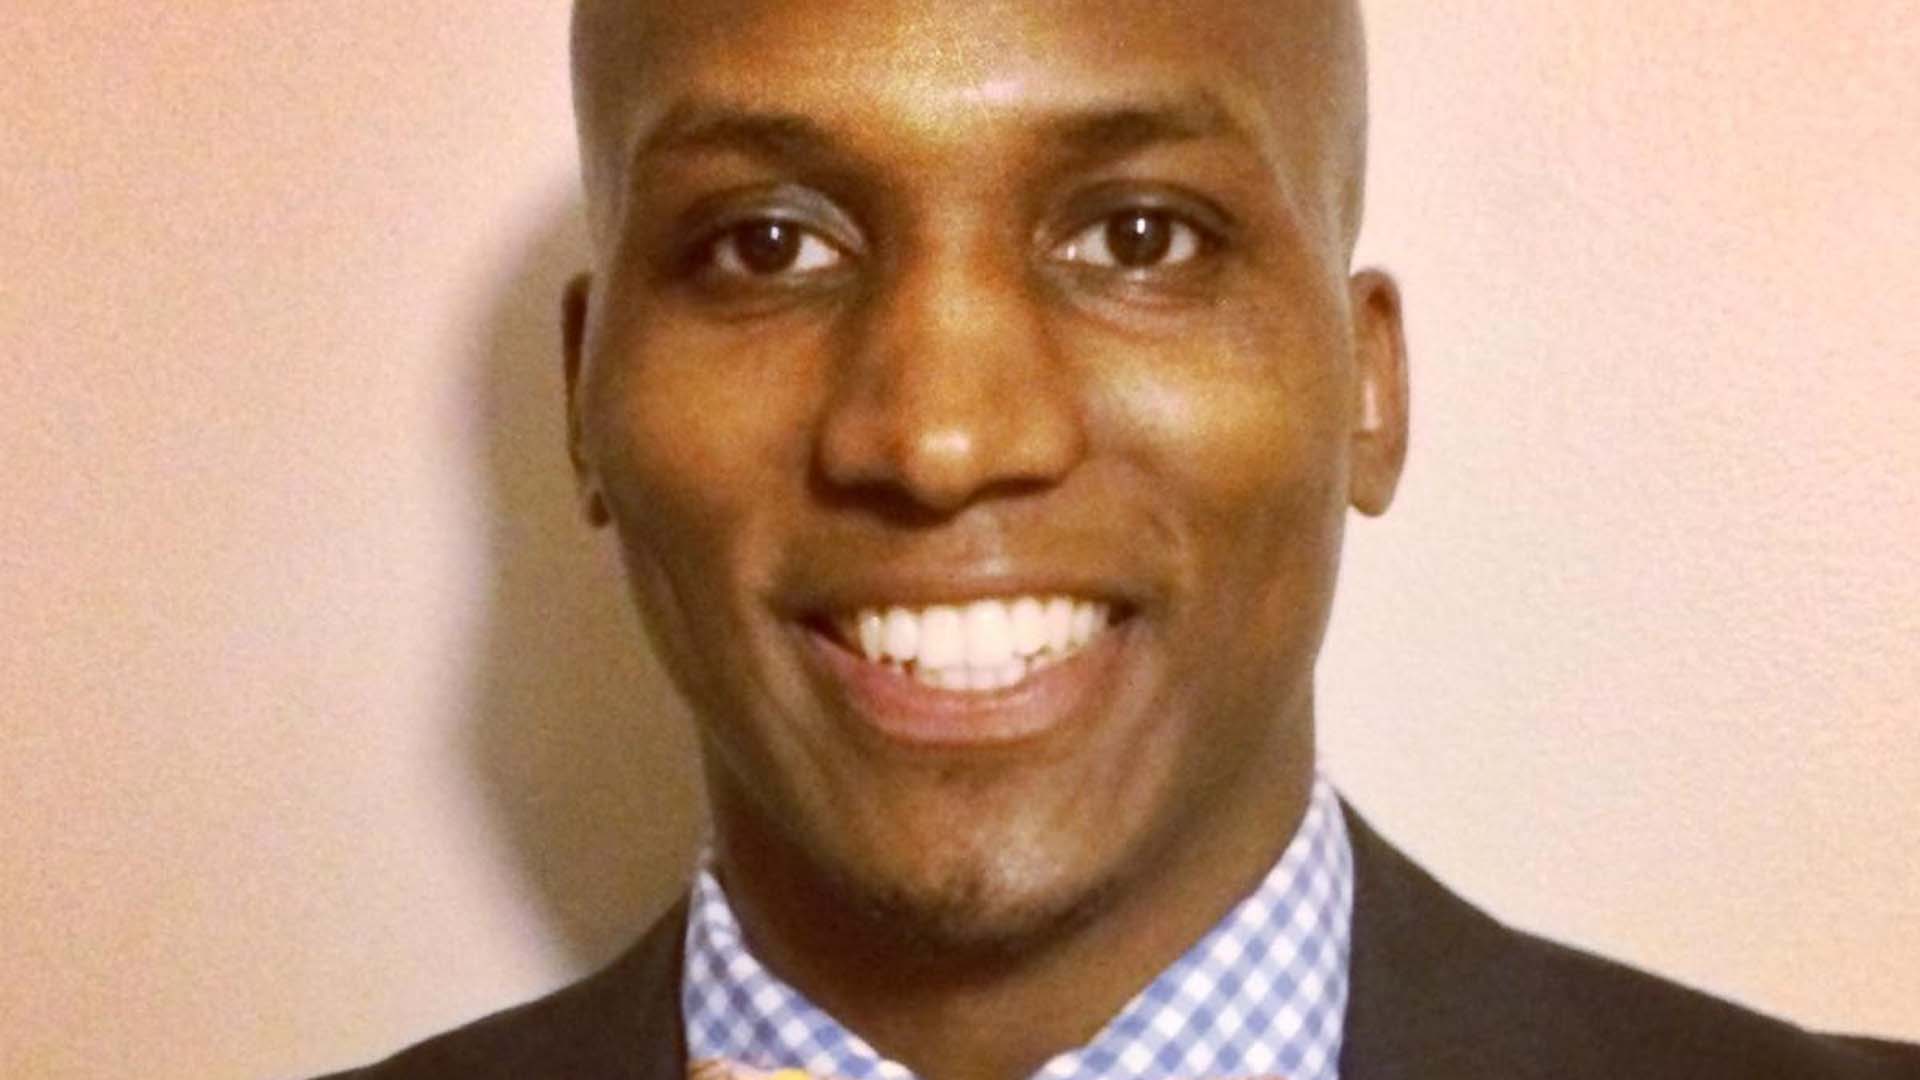 Isaiah Smith, Regional Sales Manager for Koh Young America